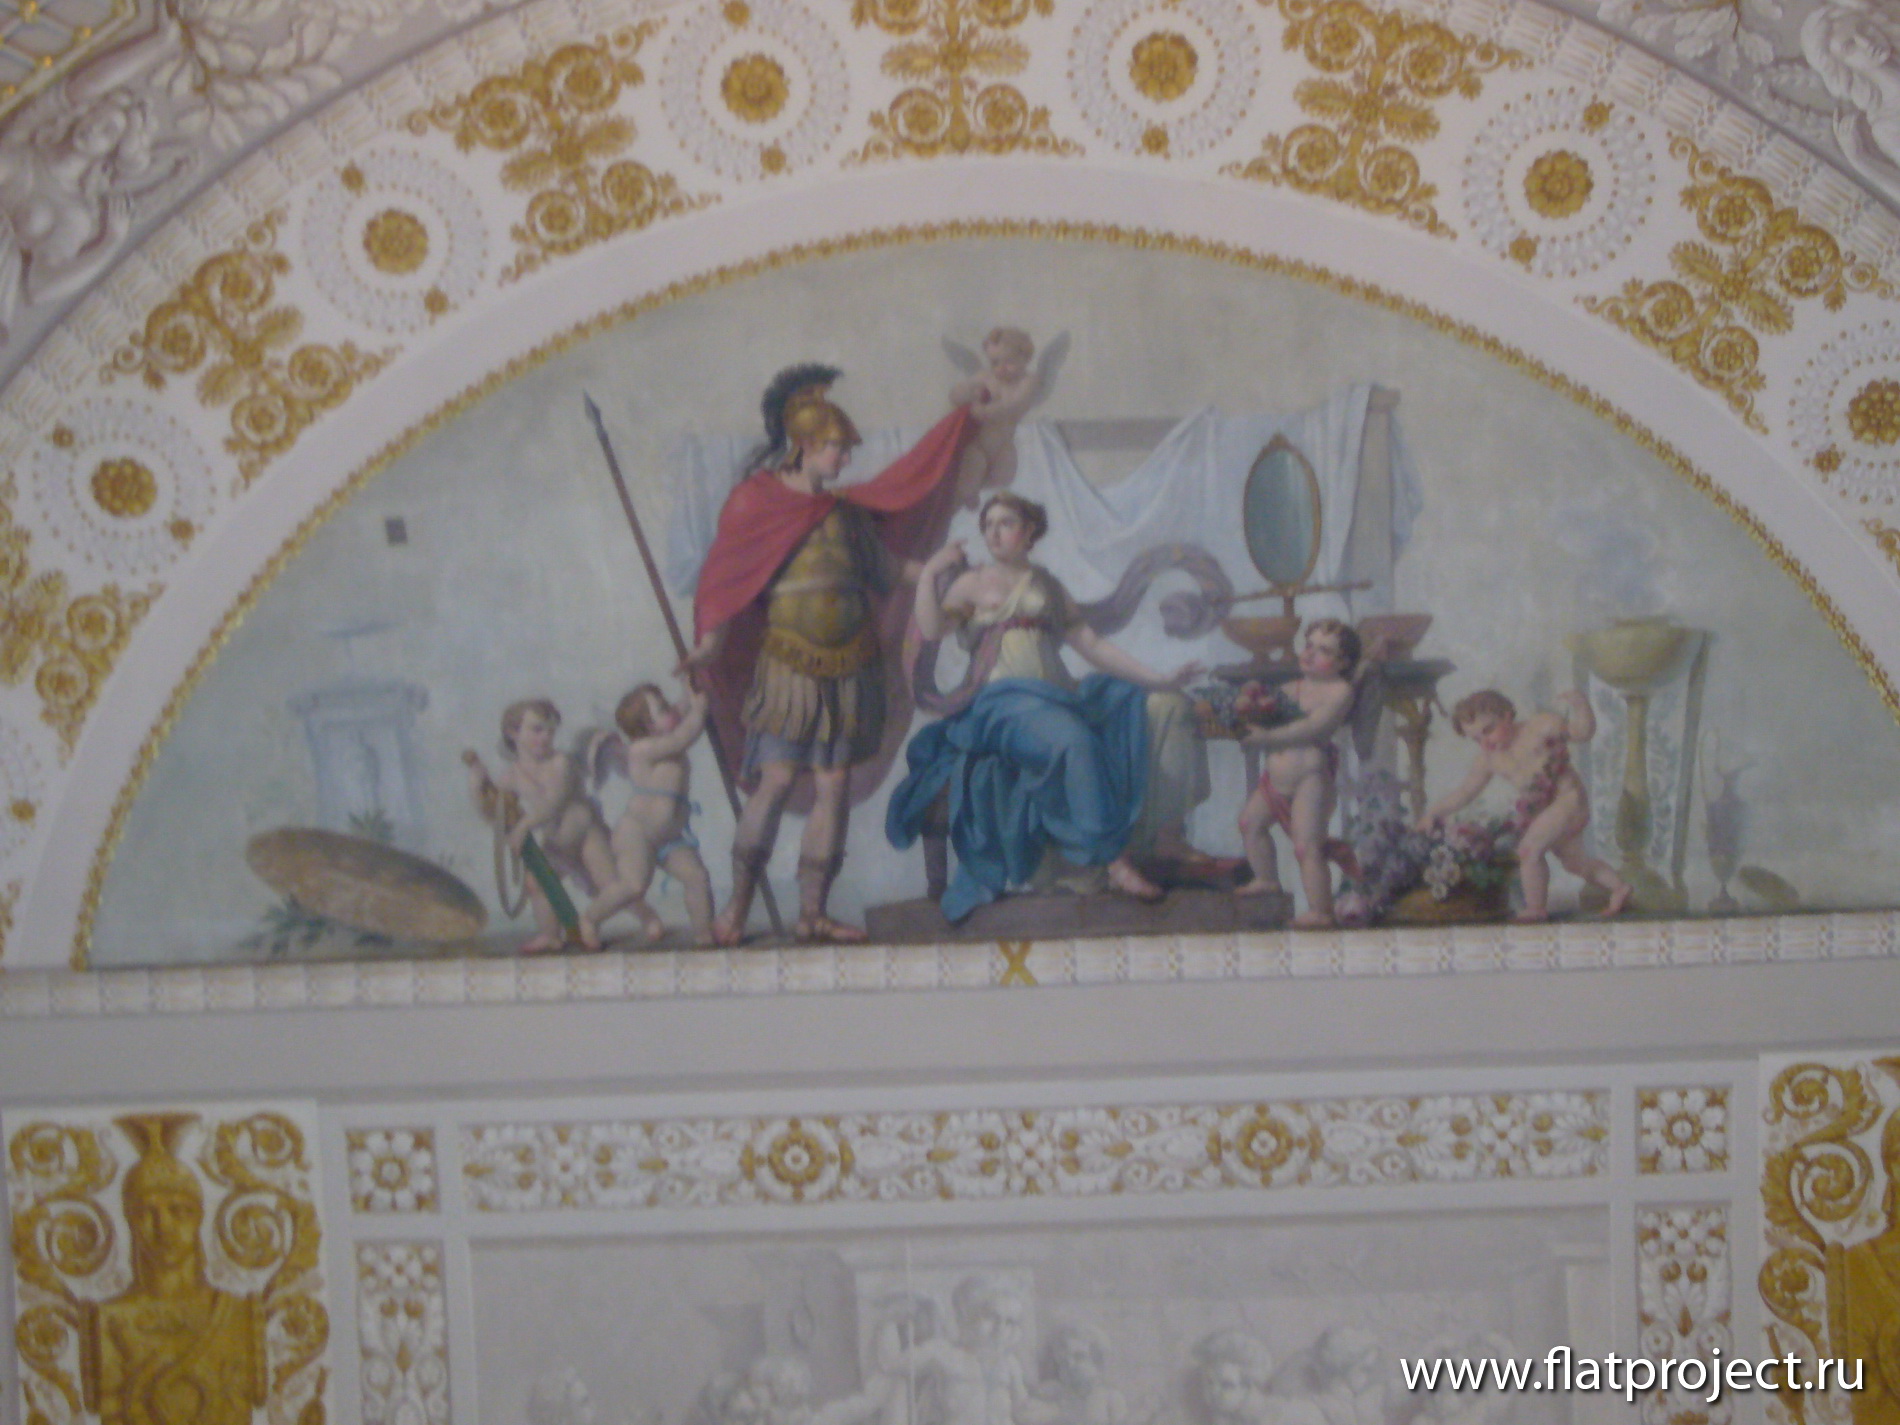 The State Russian museum interiors – photo 85